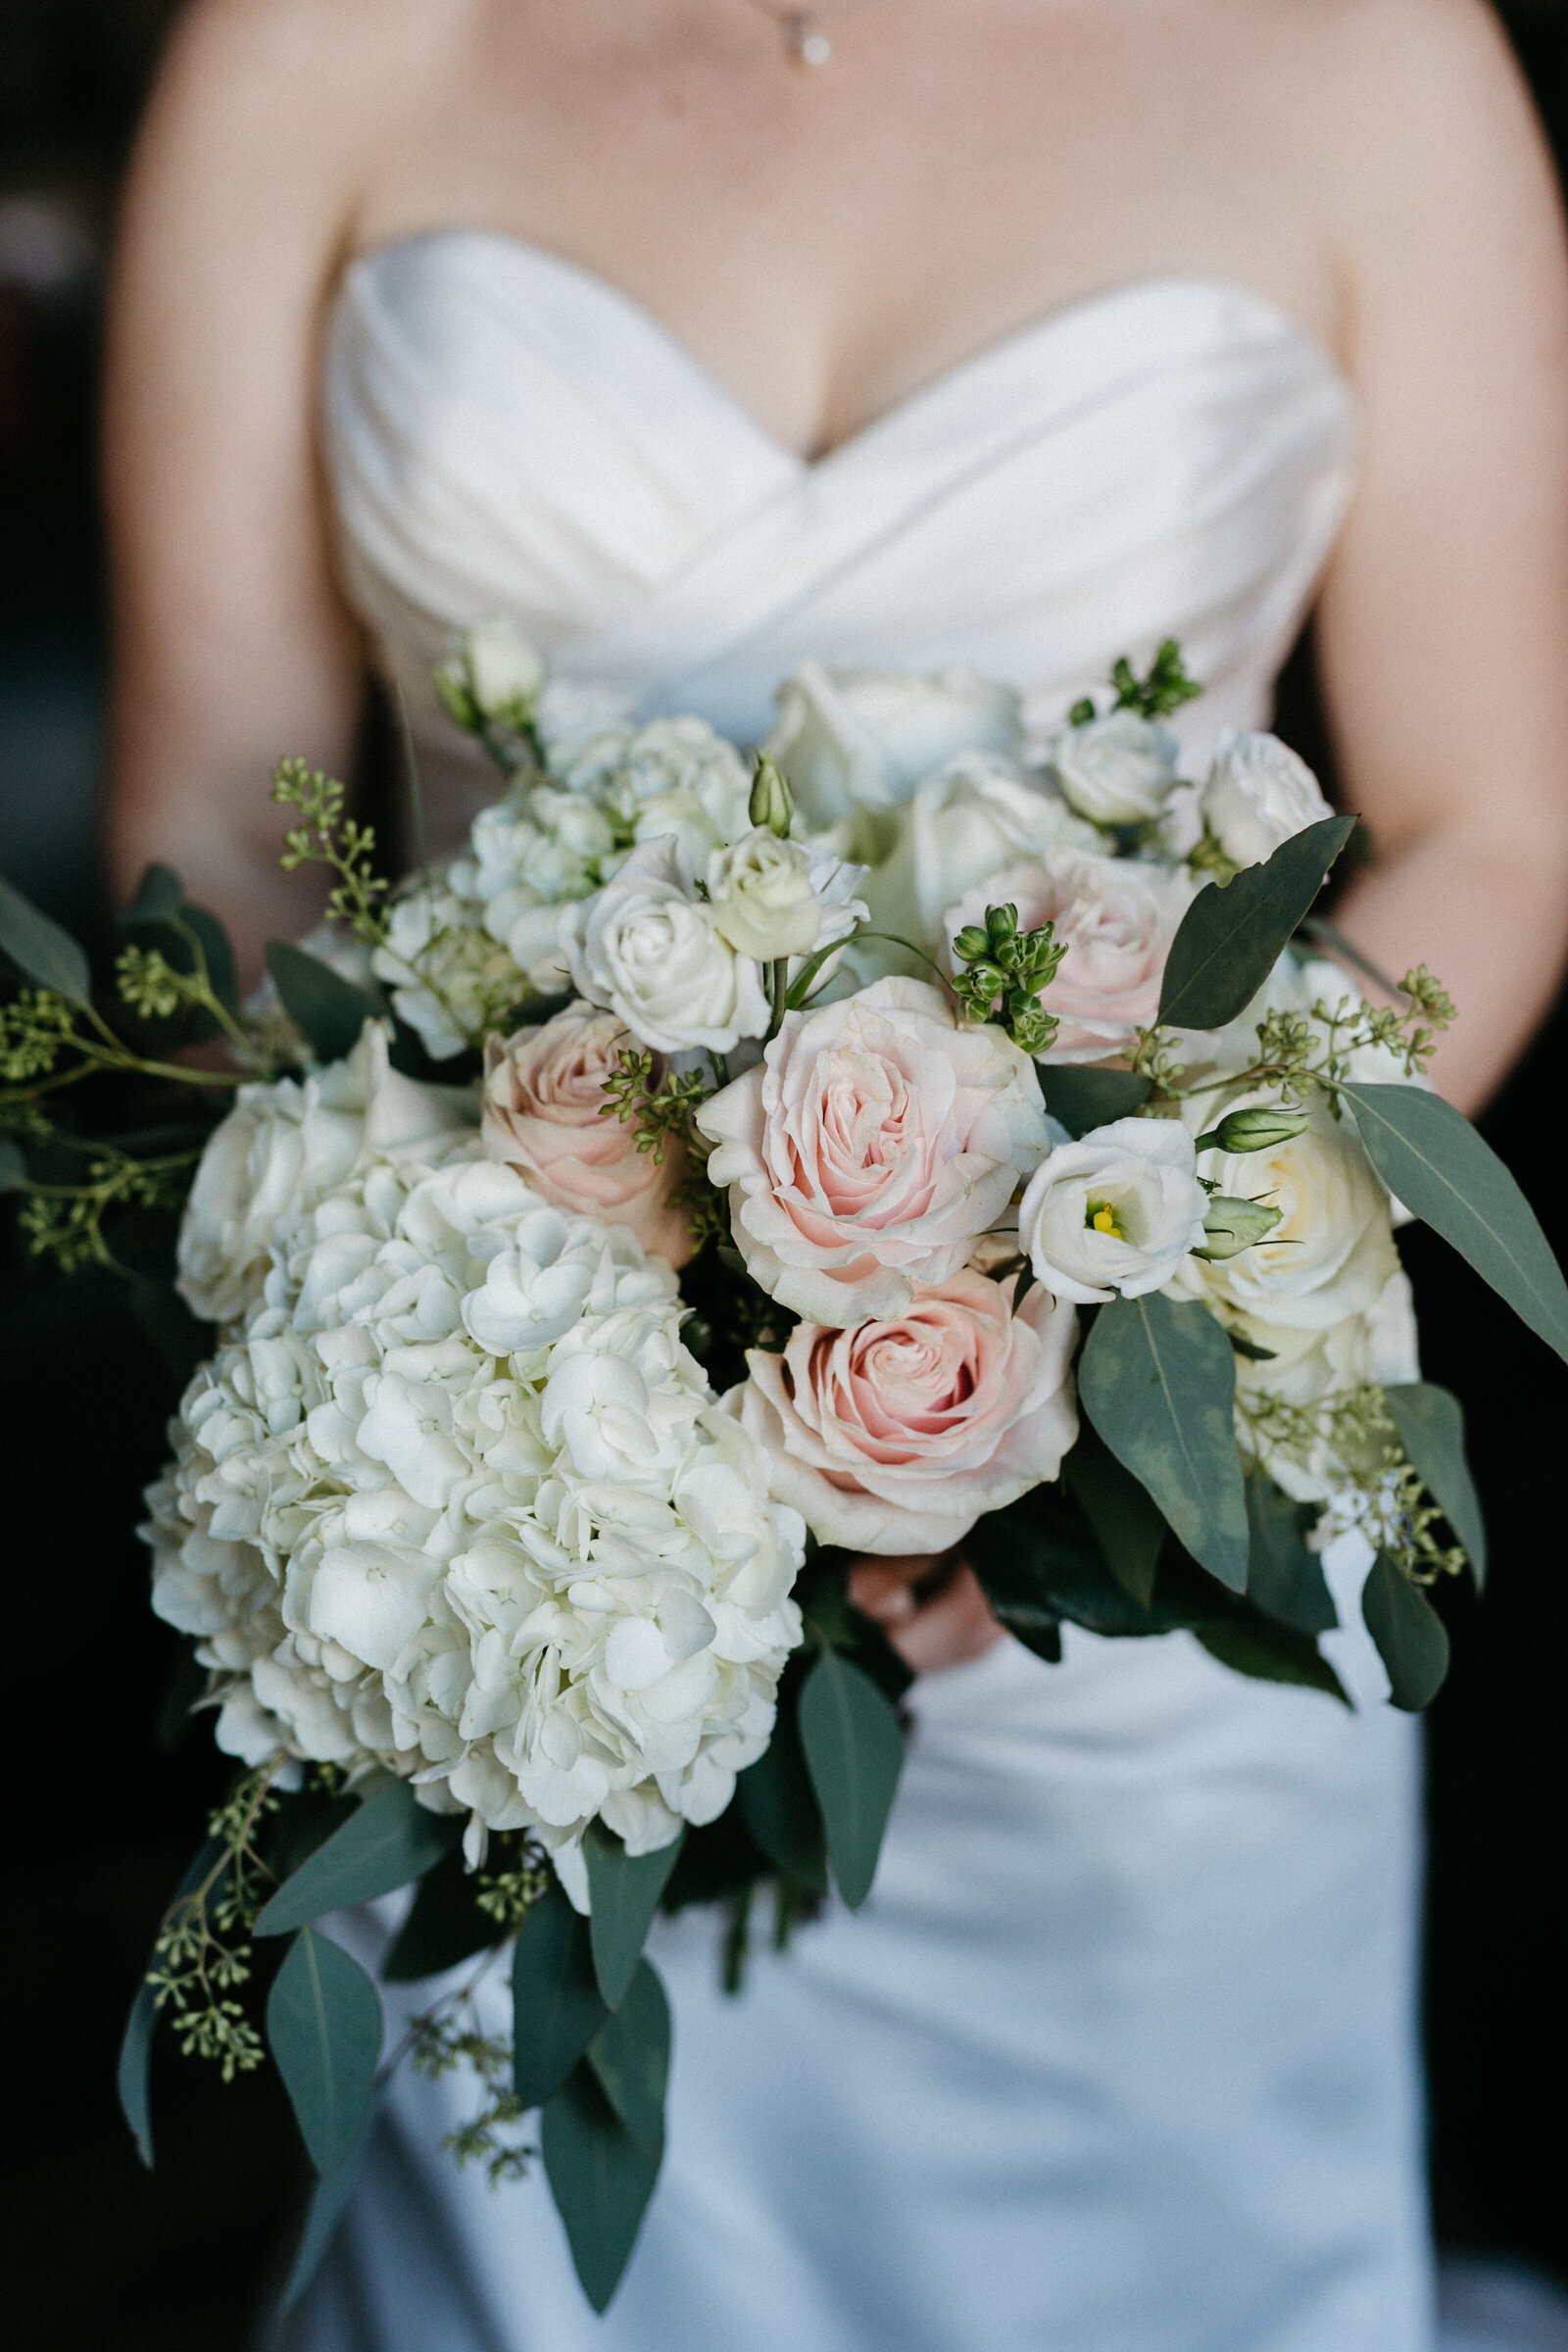 A bride holds her bouquet in front of her wedding dress